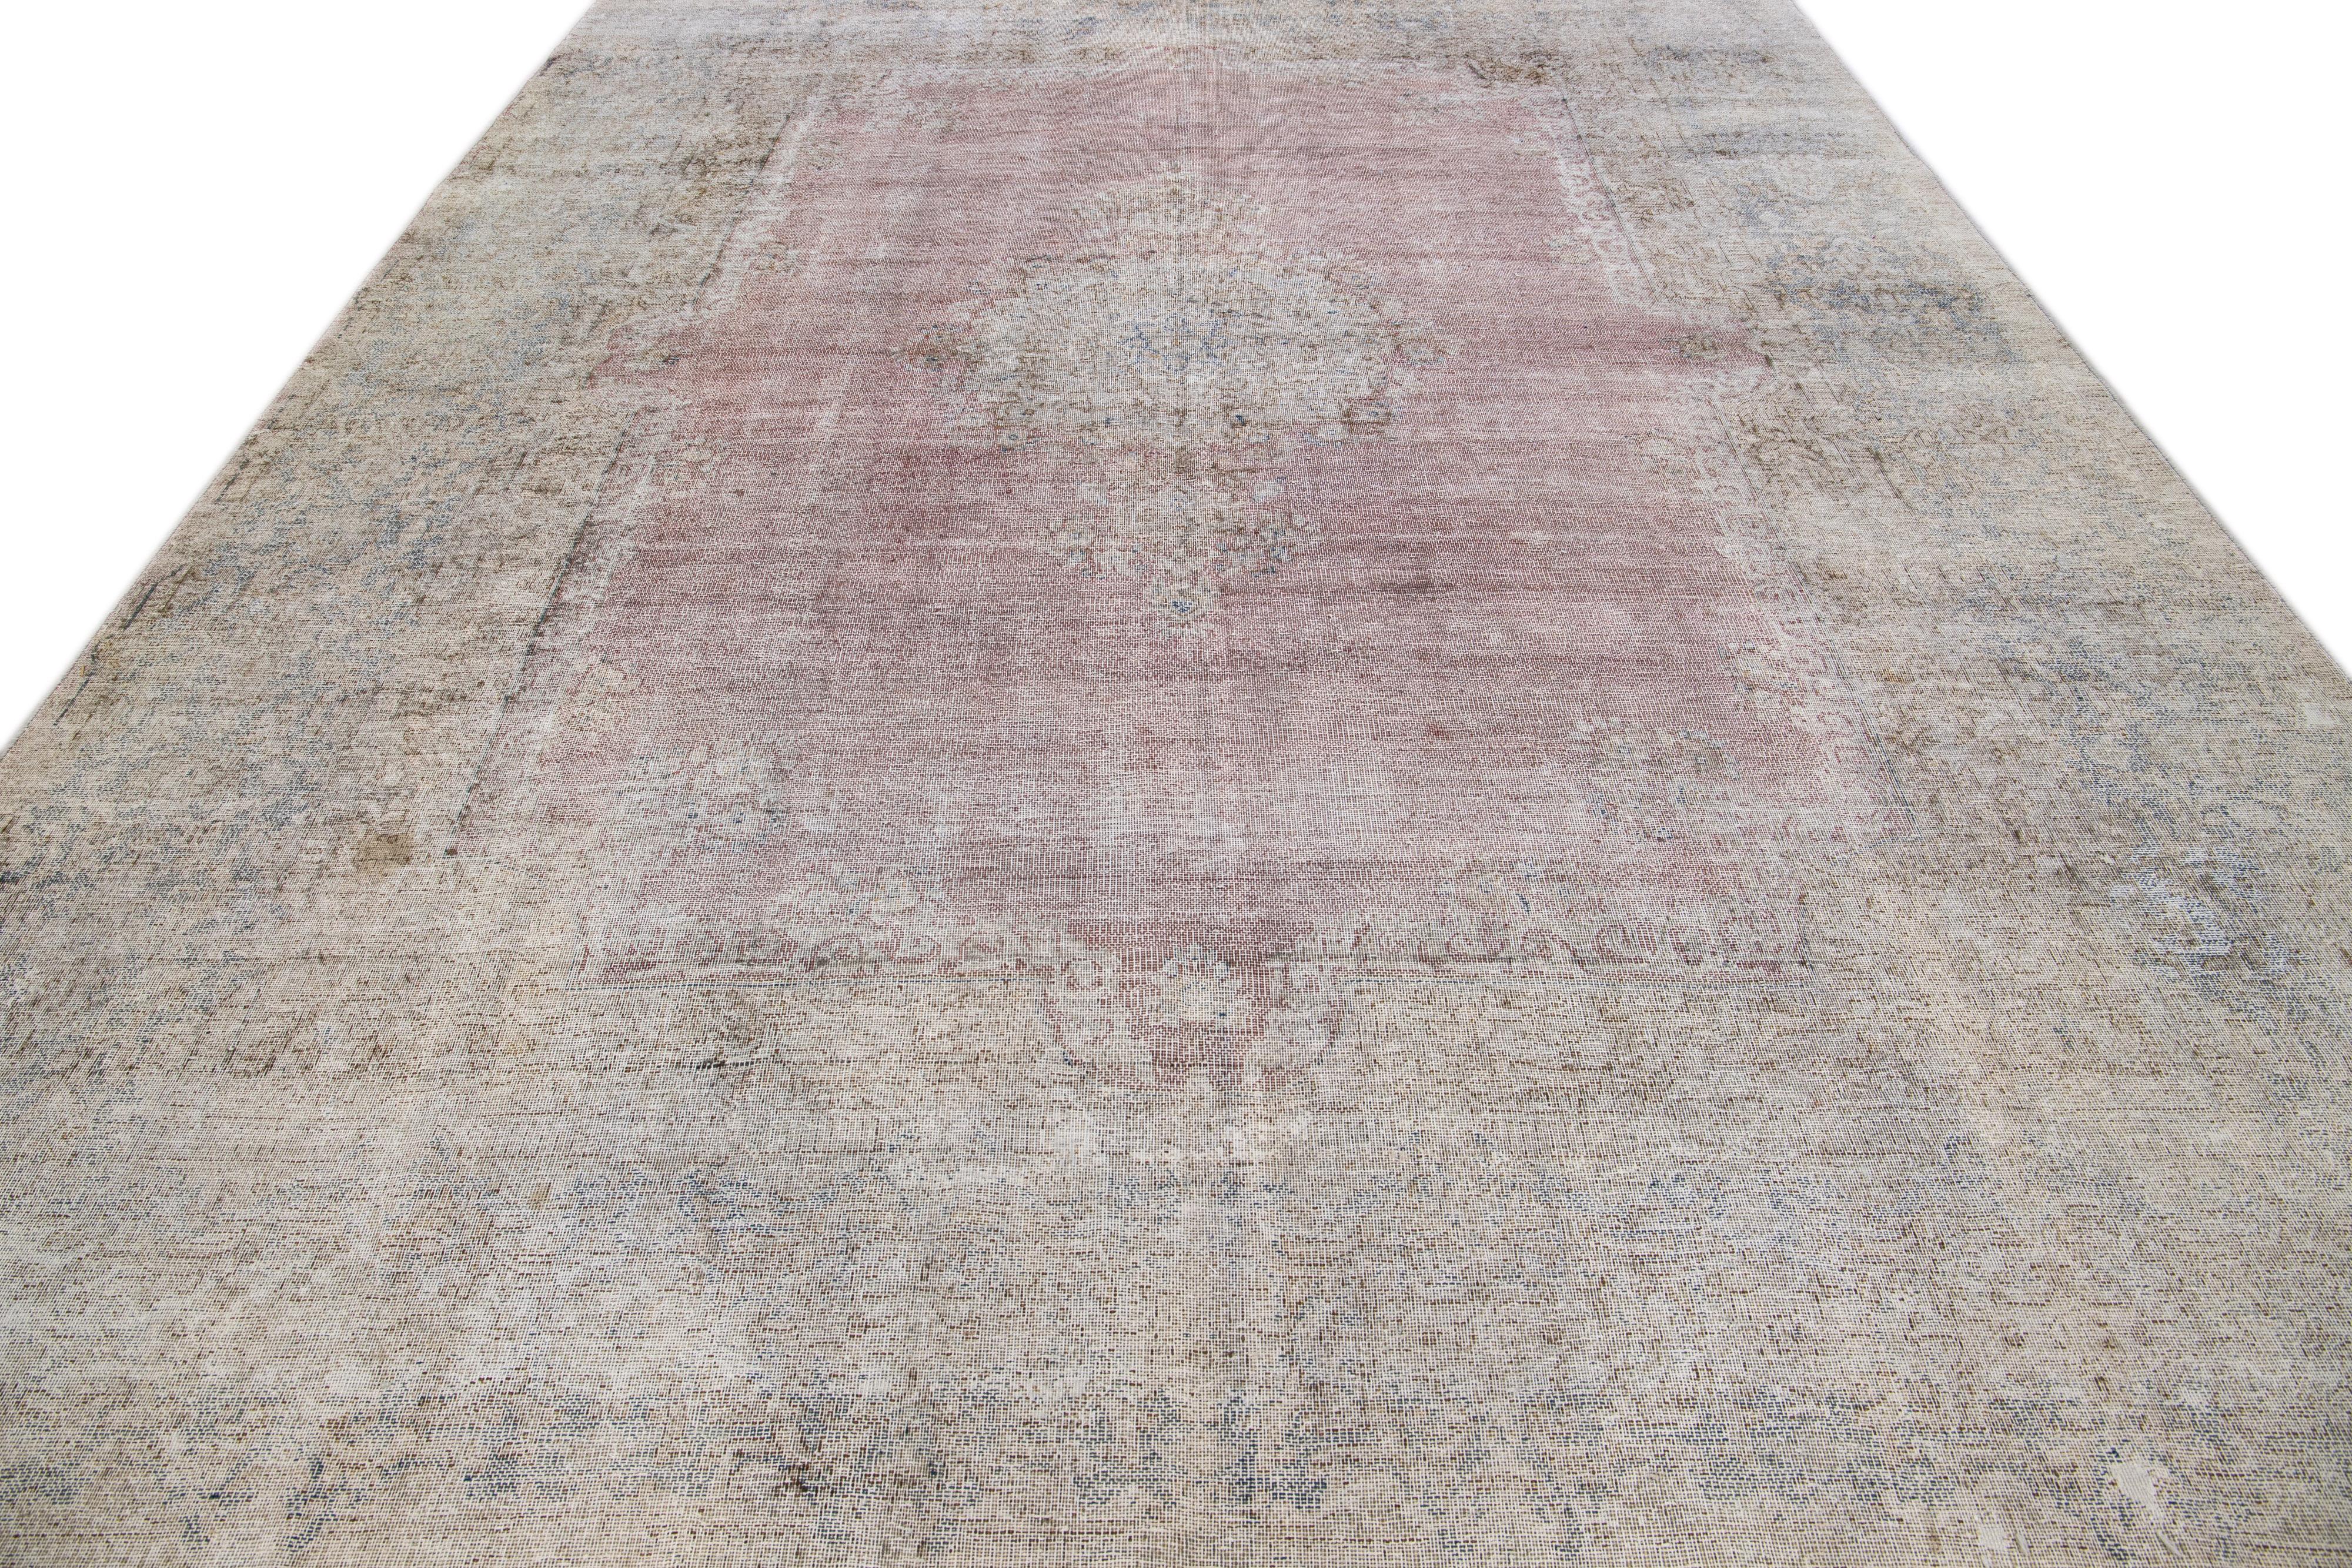 Beautiful antique Tabriz hand-knotted wool rug with a rose color field. This Persian rug has a blue frame and beige accents in a gorgeous all-over medallion design.

This rug measures: 9'9